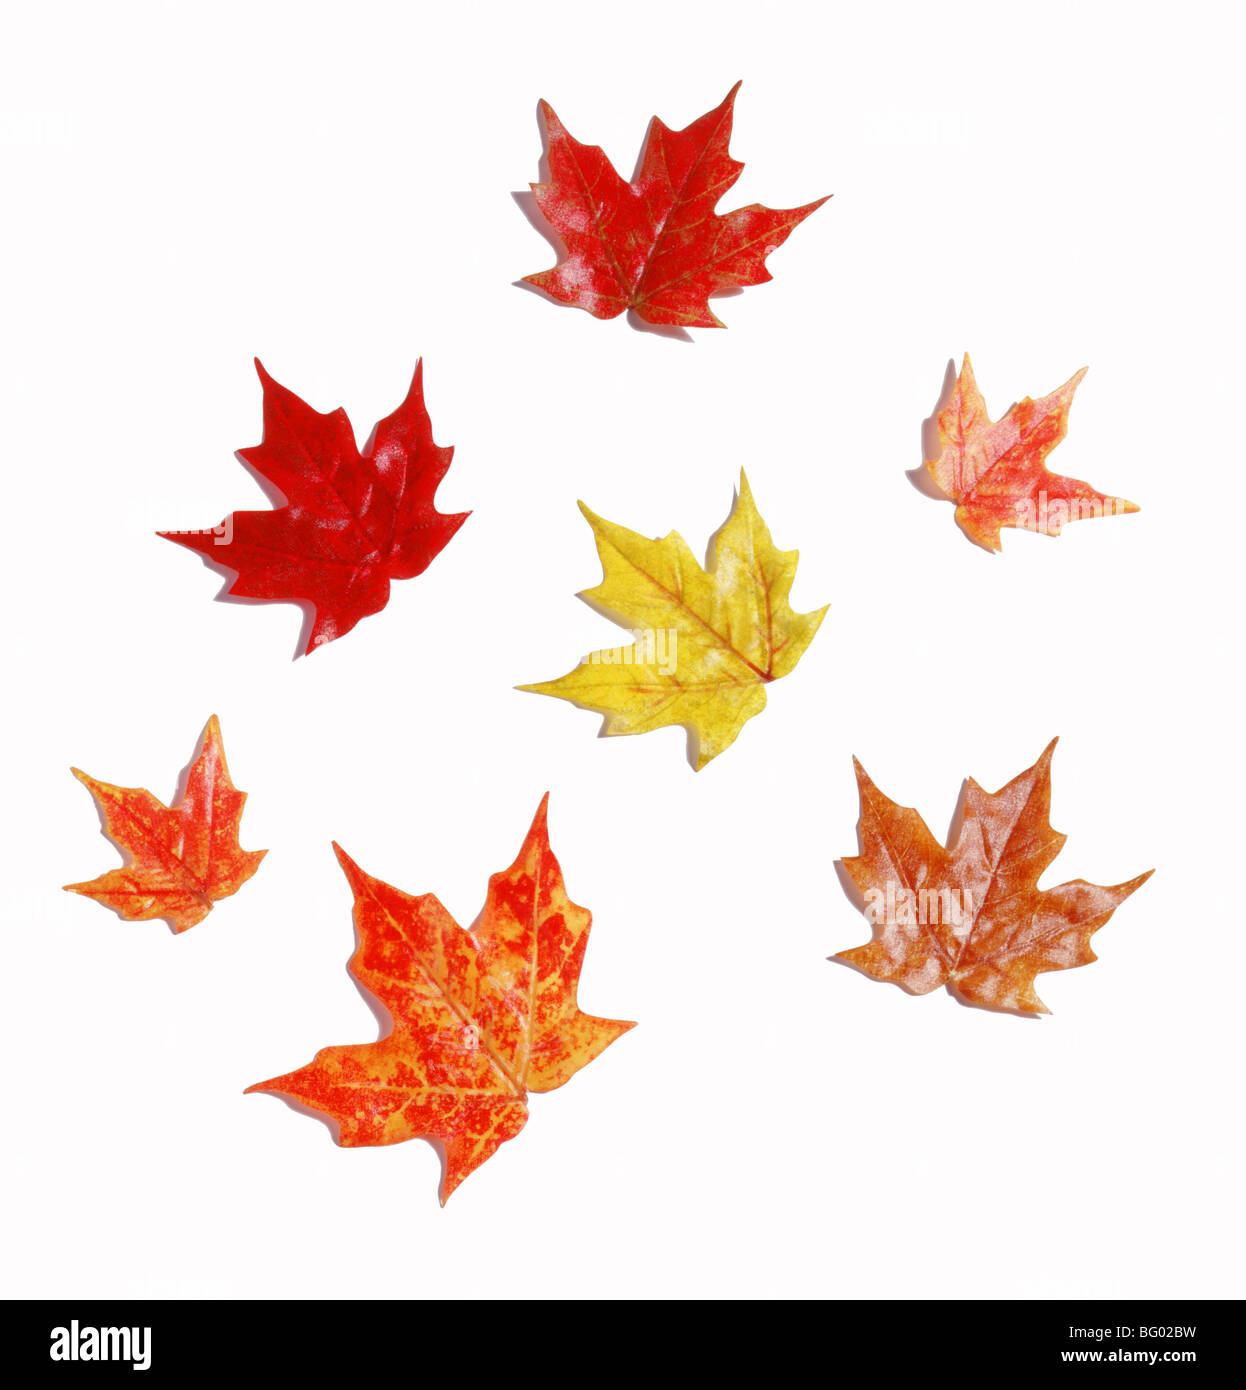 Outline of fabric fall leaves Stock Photo